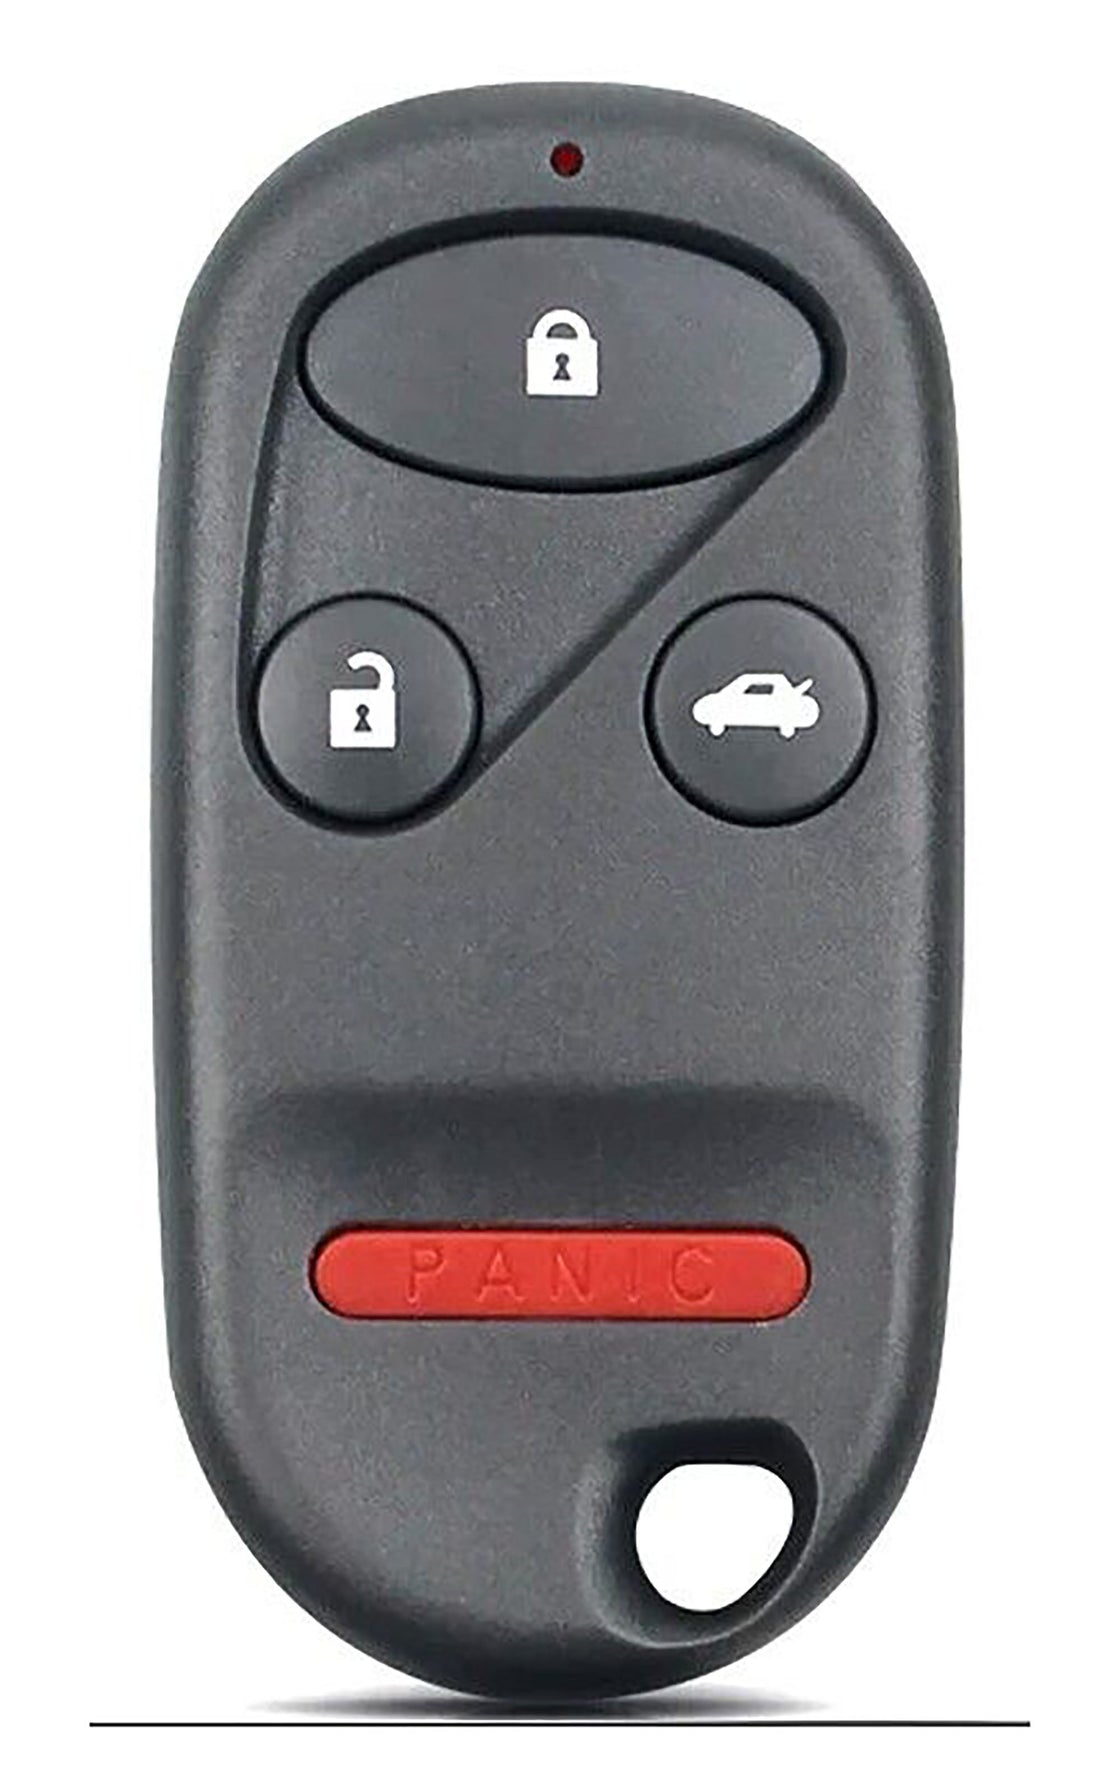 1995 Acura Integra Replacement Key Fob Remote